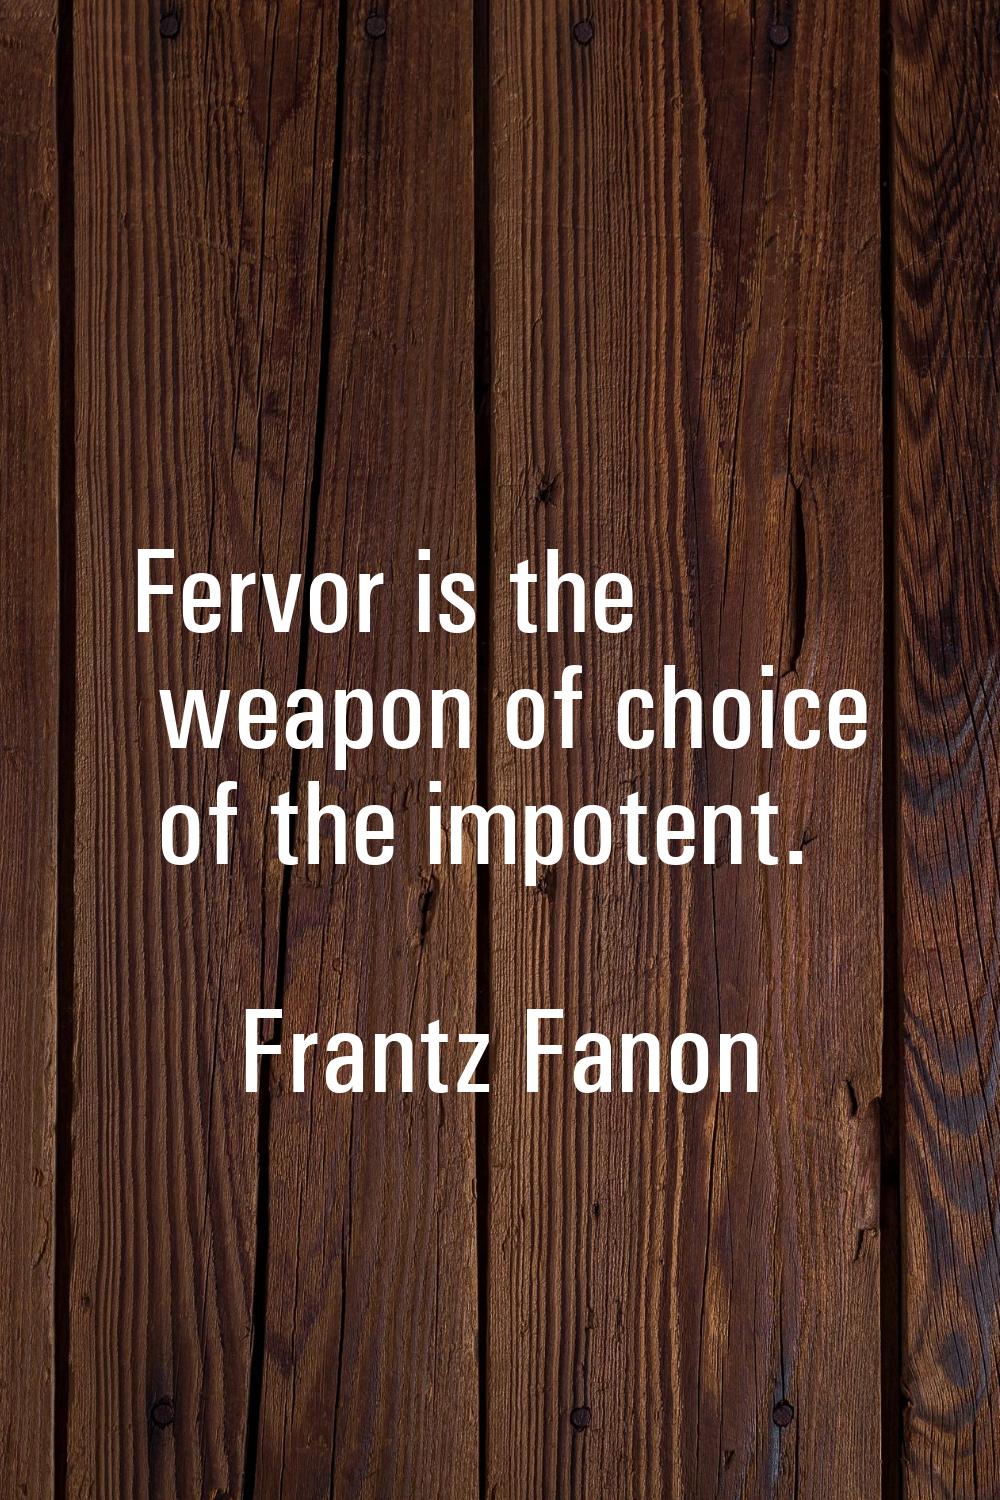 Fervor is the weapon of choice of the impotent.